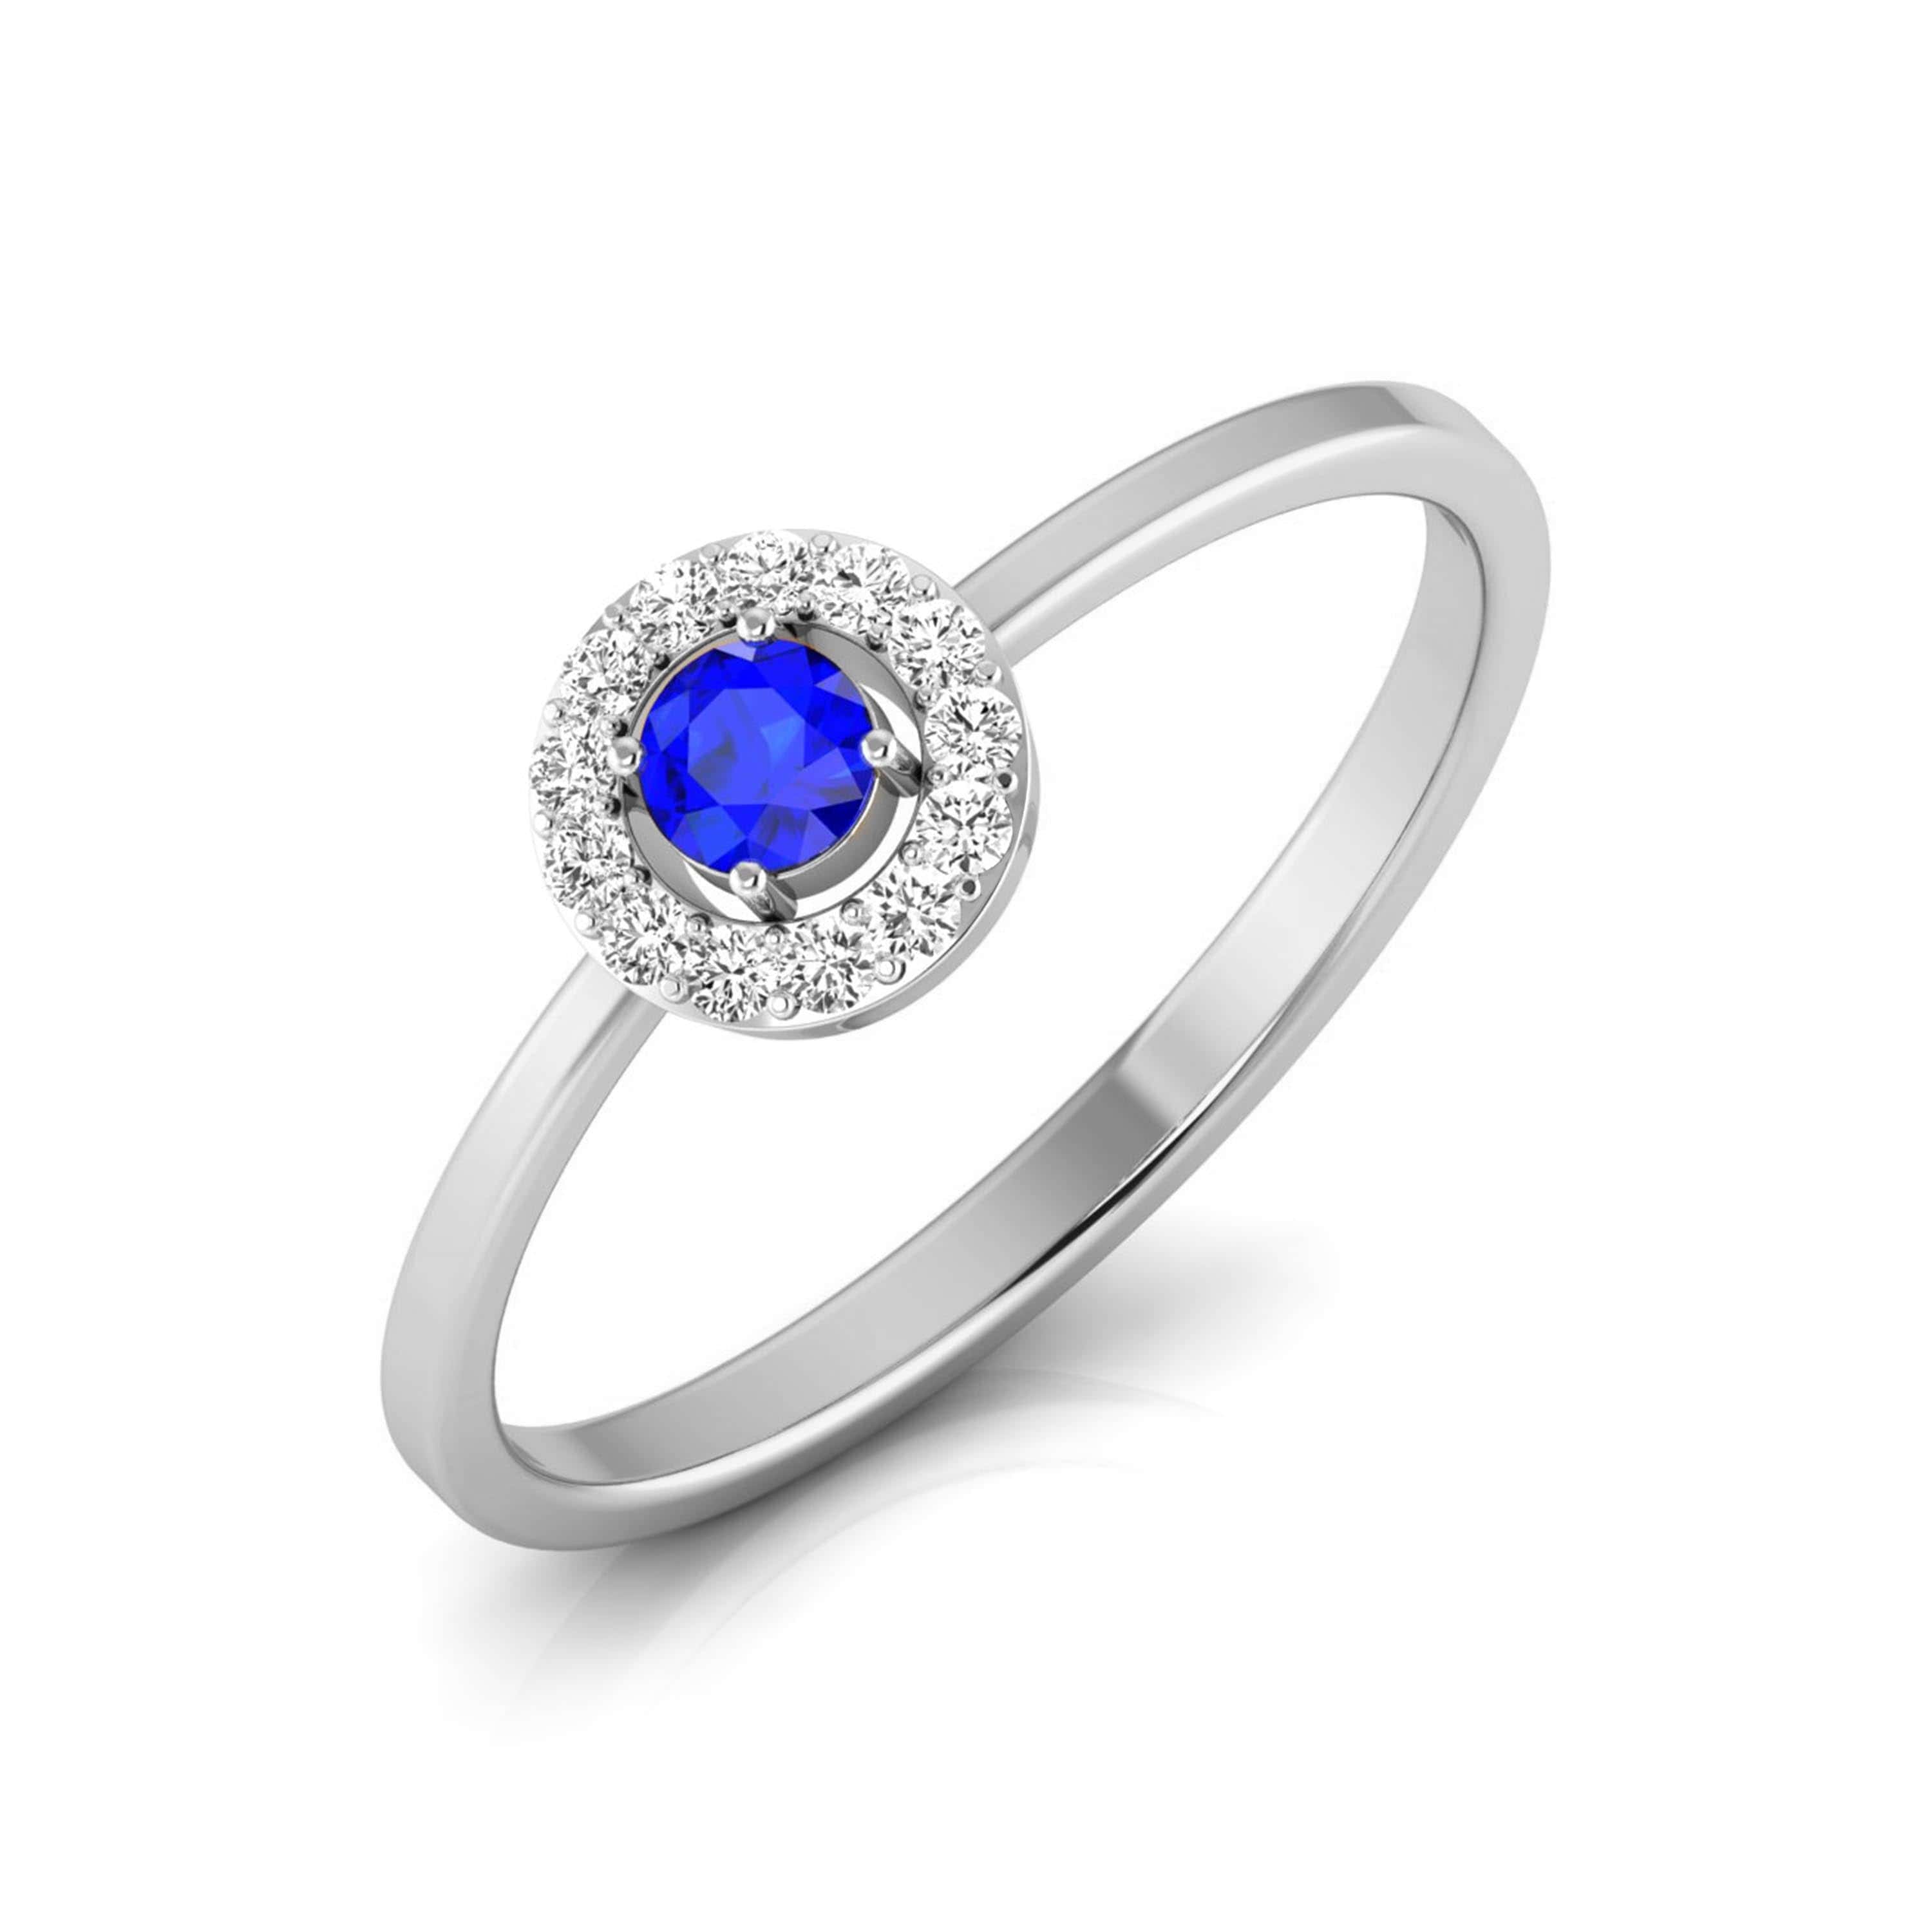 Your Complete Guide to Buying a Sapphire